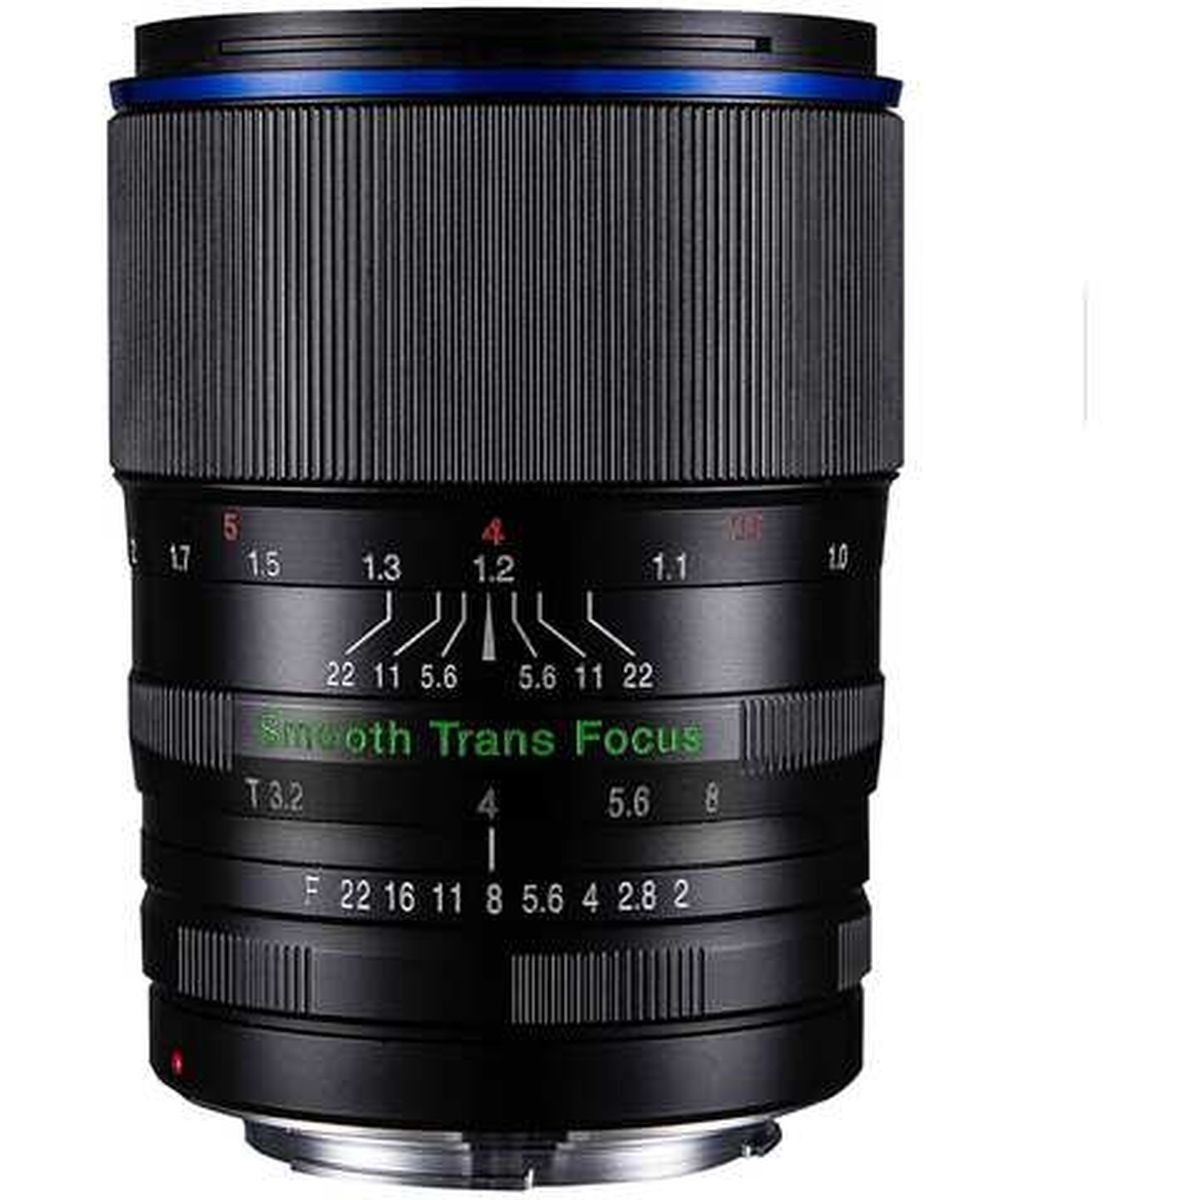 LAOWA 105mm F/2.0 (T3.2) STF - Smooth Trans Focus Sony FE